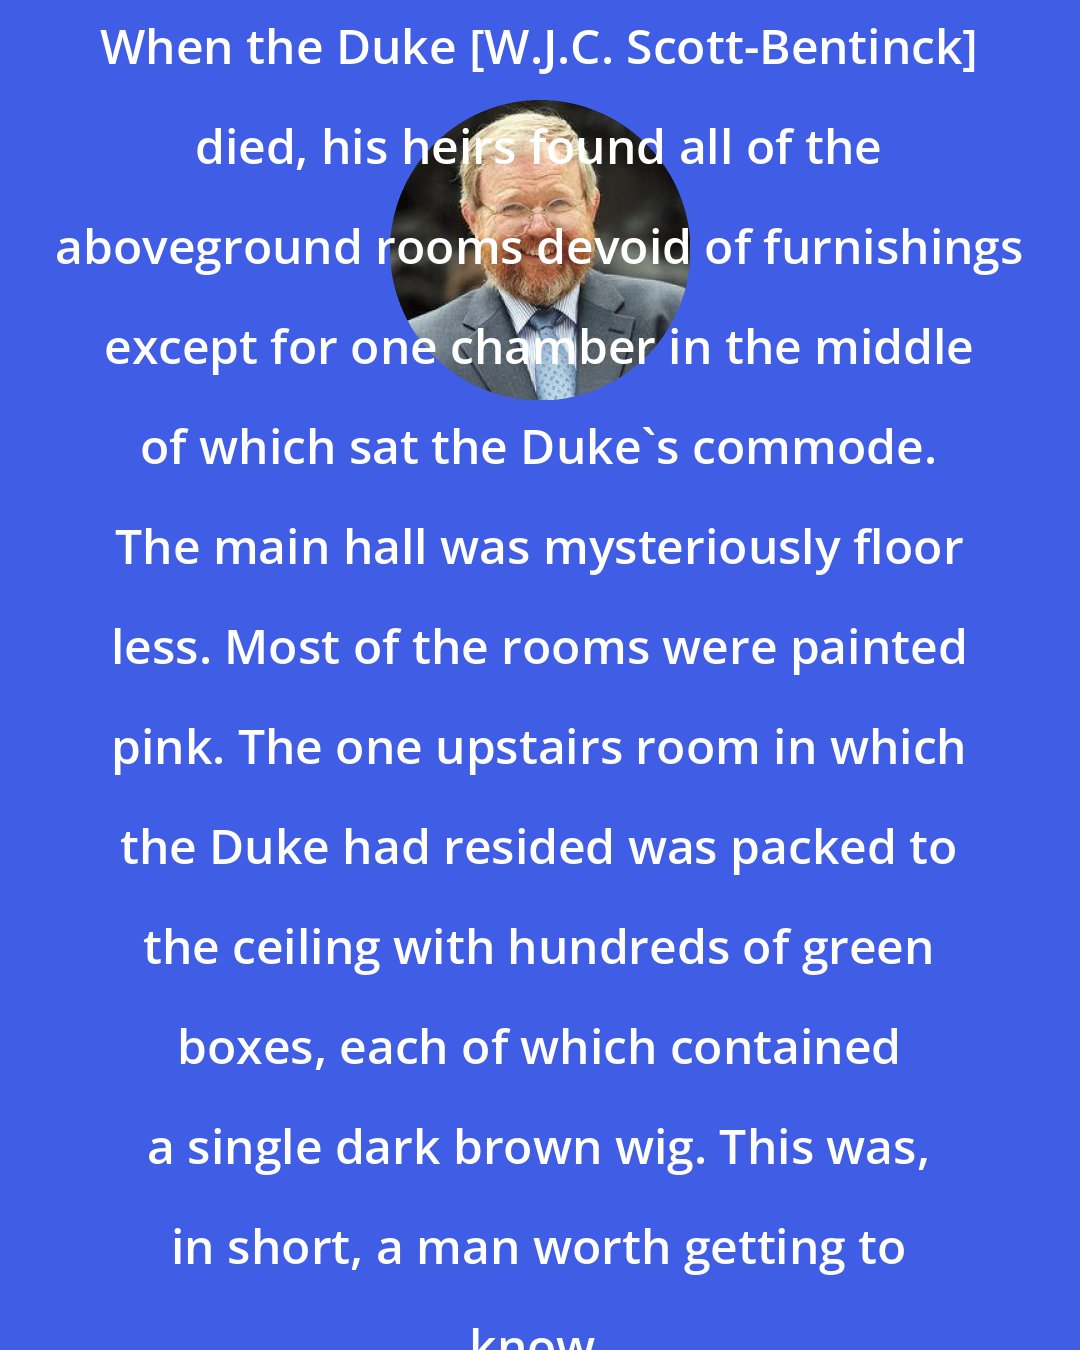 Bill Bryson: When the Duke [W.J.C. Scott-Bentinck] died, his heirs found all of the aboveground rooms devoid of furnishings except for one chamber in the middle of which sat the Duke's commode. The main hall was mysteriously floor less. Most of the rooms were painted pink. The one upstairs room in which the Duke had resided was packed to the ceiling with hundreds of green boxes, each of which contained a single dark brown wig. This was, in short, a man worth getting to know.